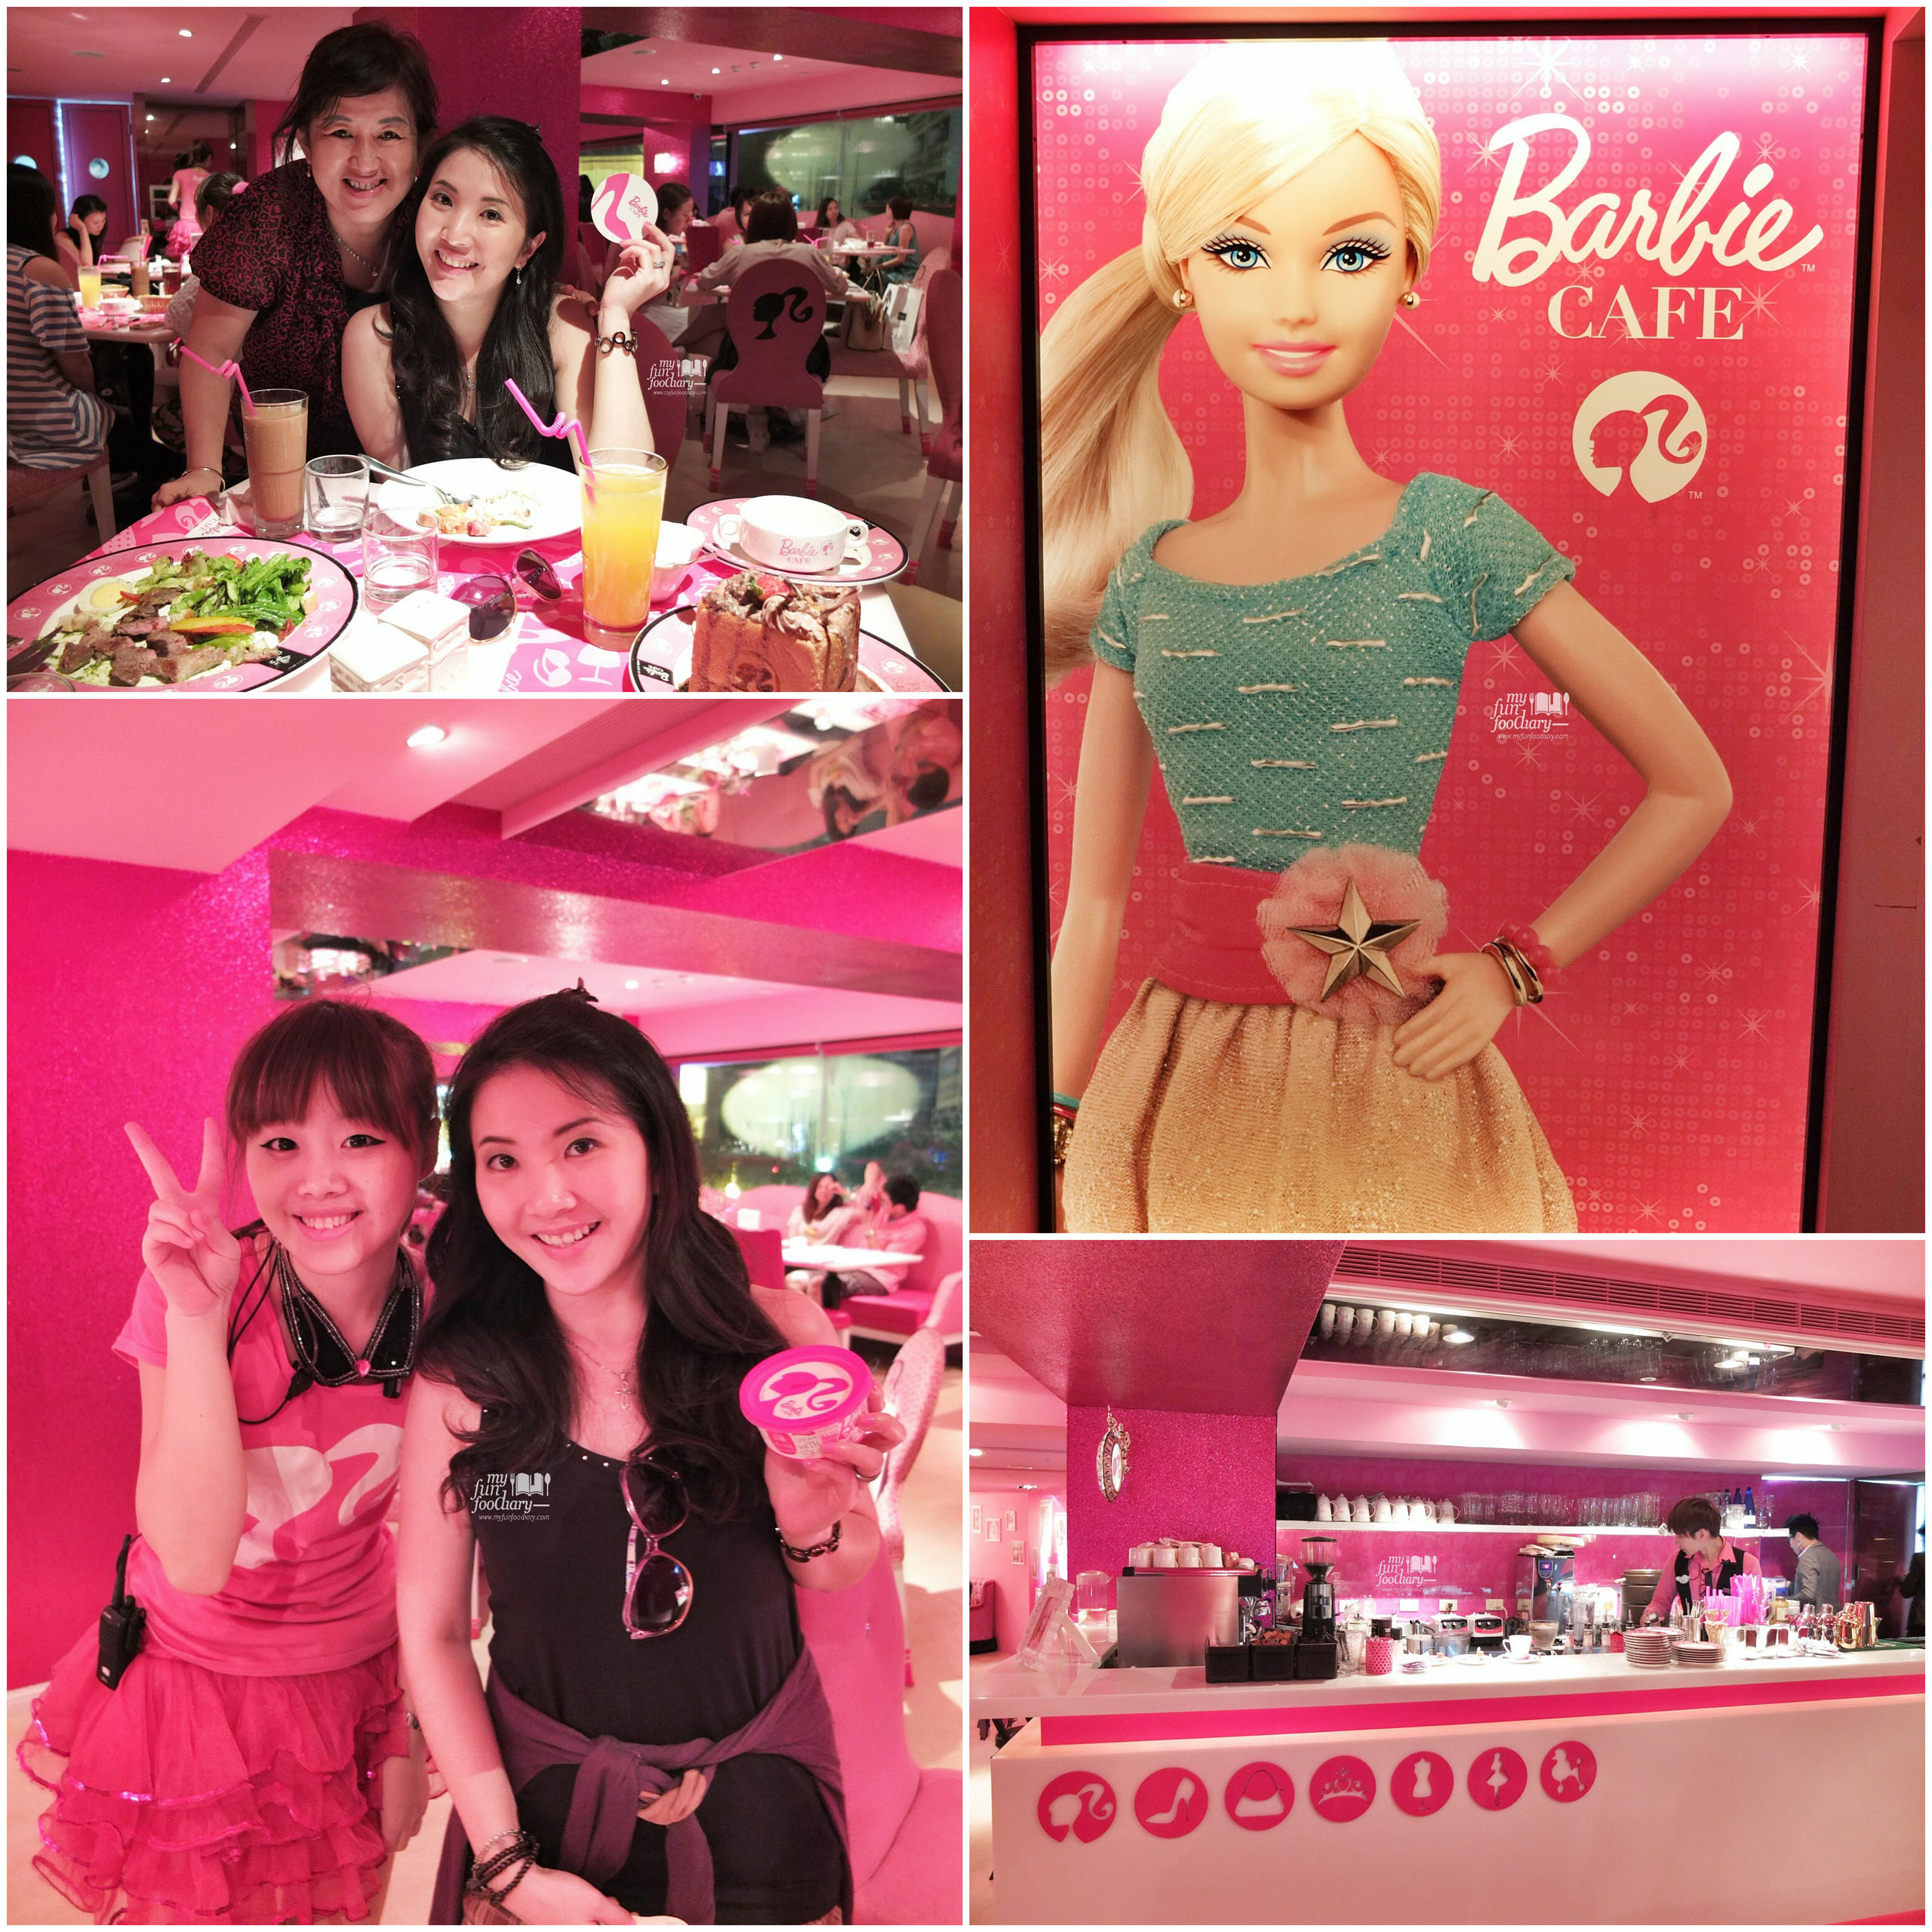 My Happy Moments at Barbie Cafe Taiwan by Myfunfoodiary